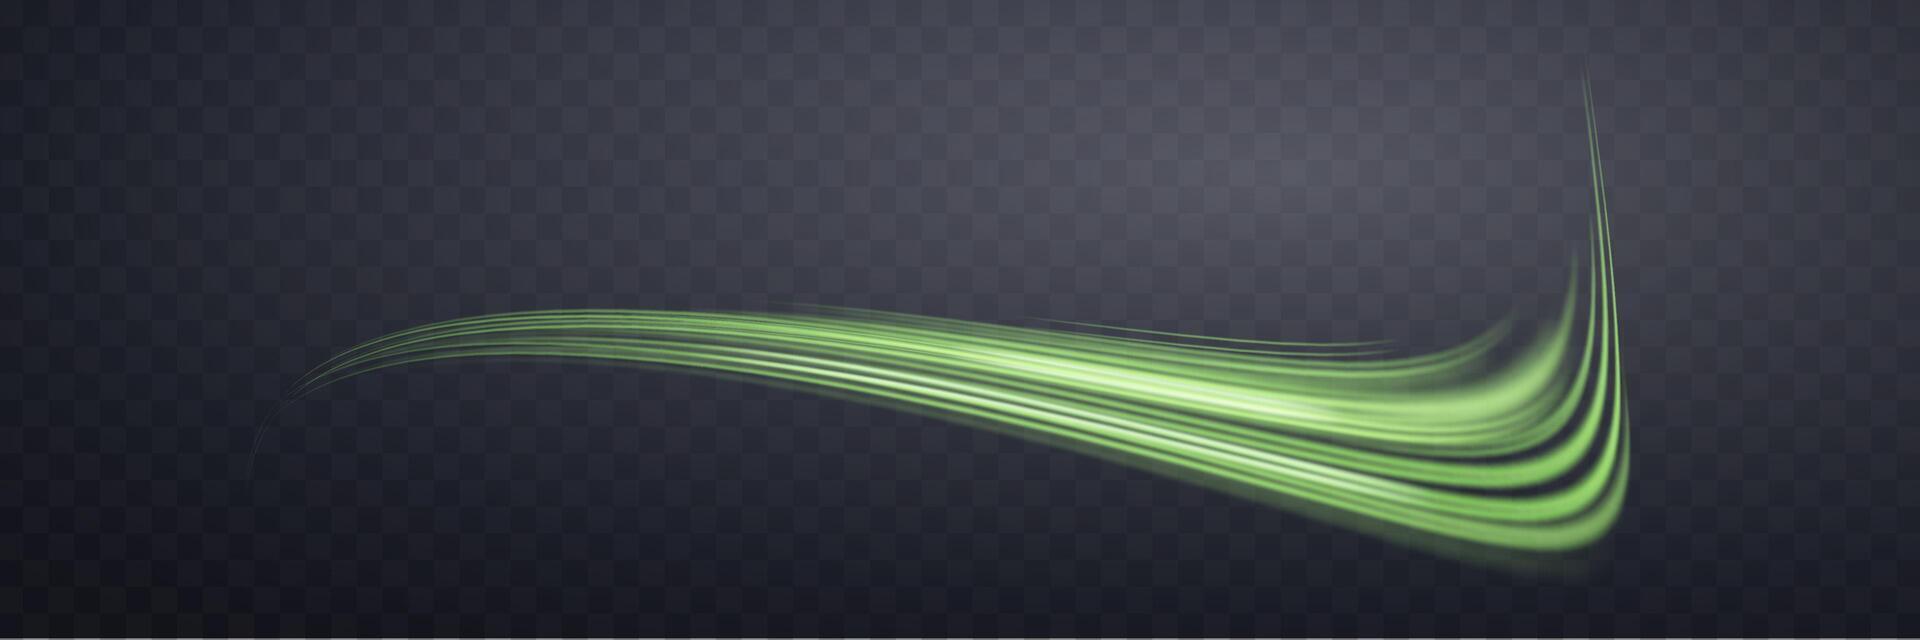 Glowing green lines. Neon realistic energy speed. Abstract light effect on a dark background. Vector illustration.